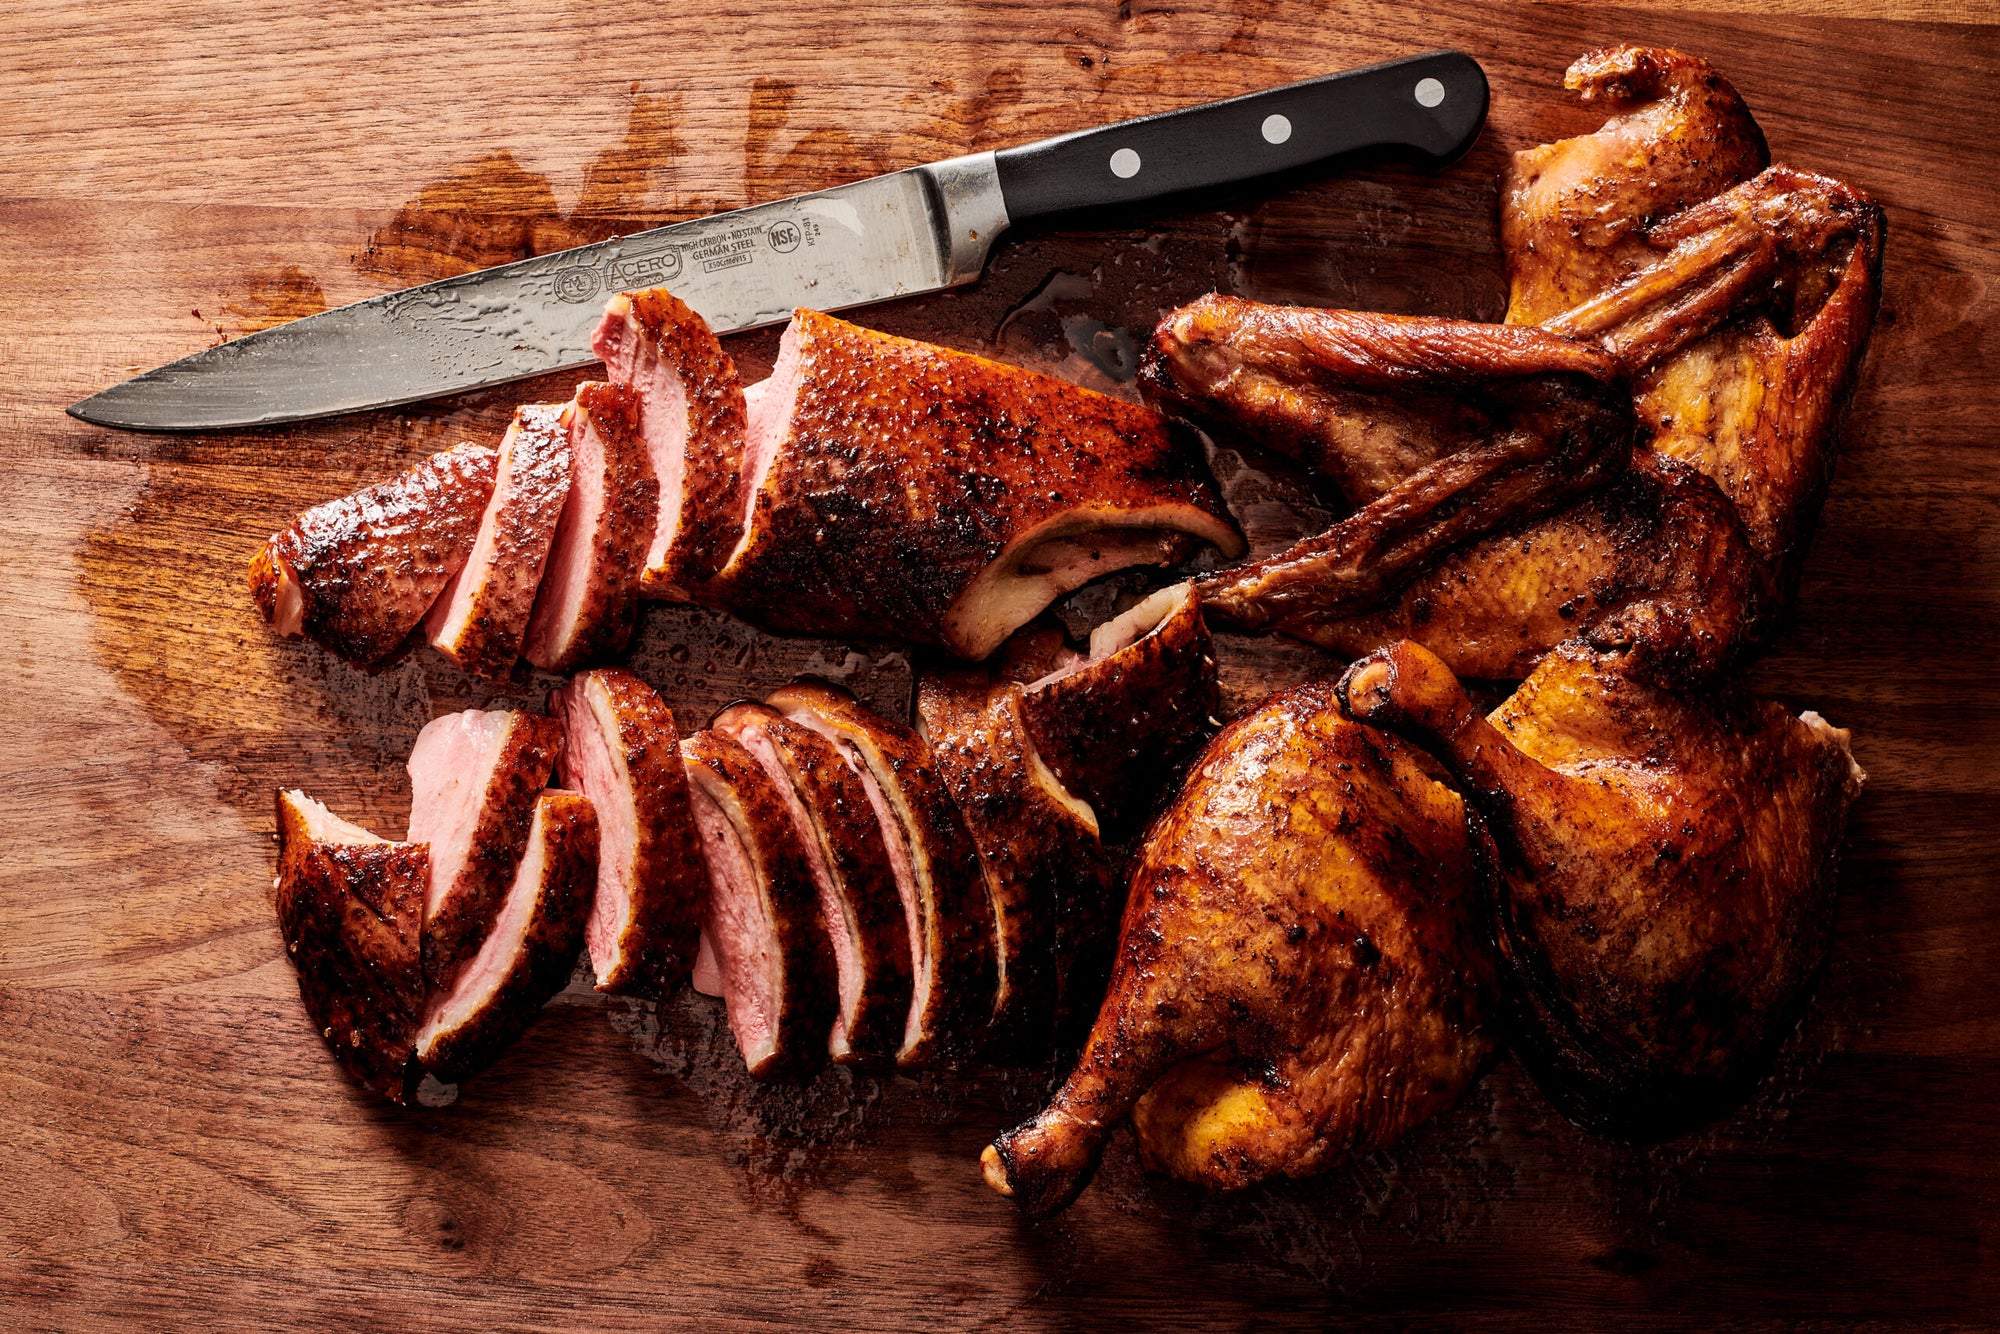 The 7 Best Carving Knives of 2023 - Best Knife for Meat